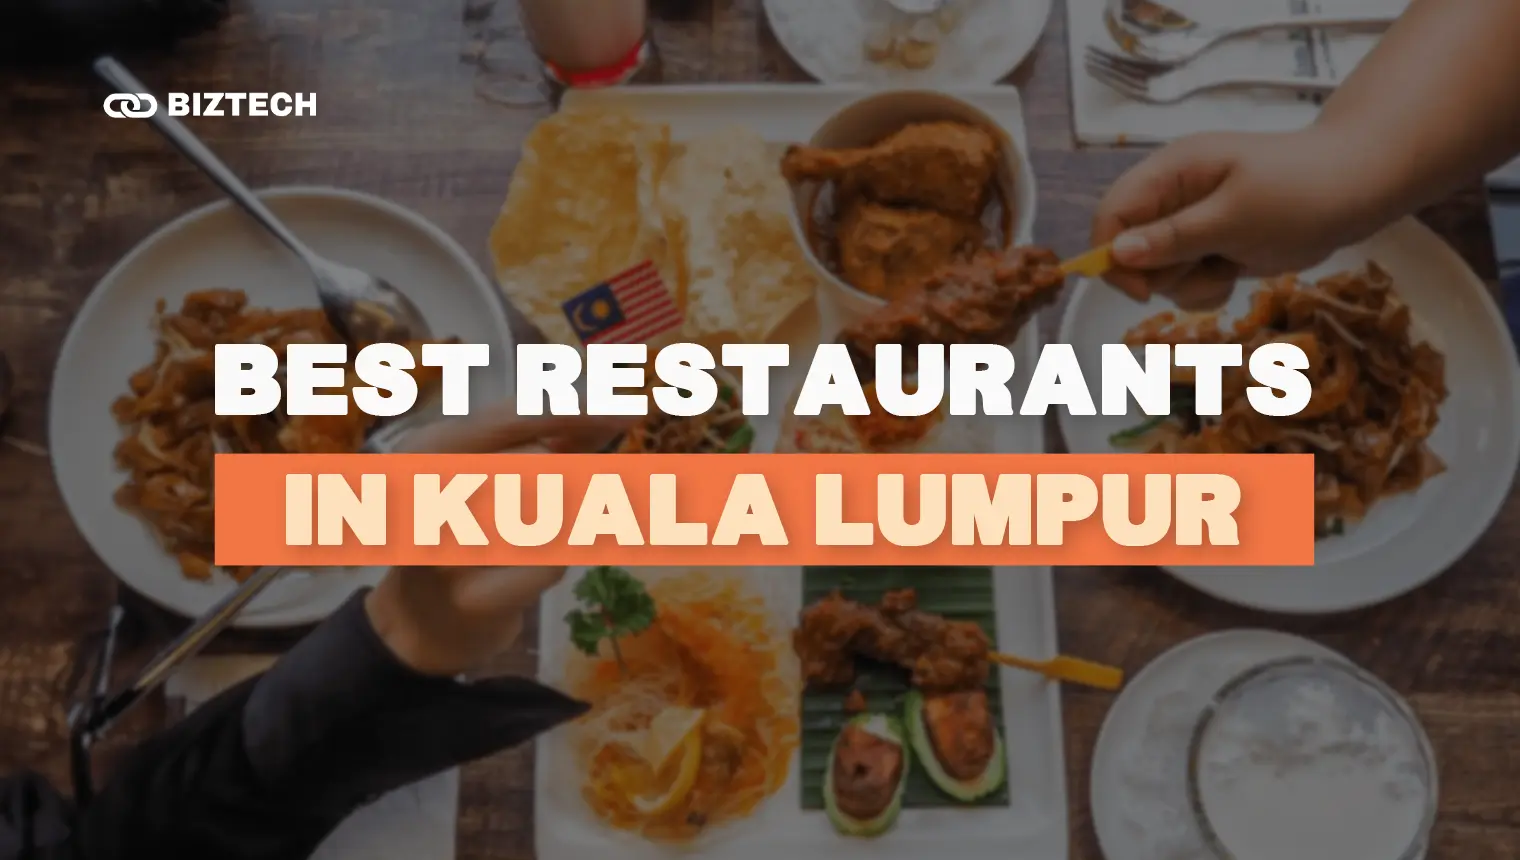 Best Restaurant in KL: Indulging in Palatable Dishes at These 12 Restaurants